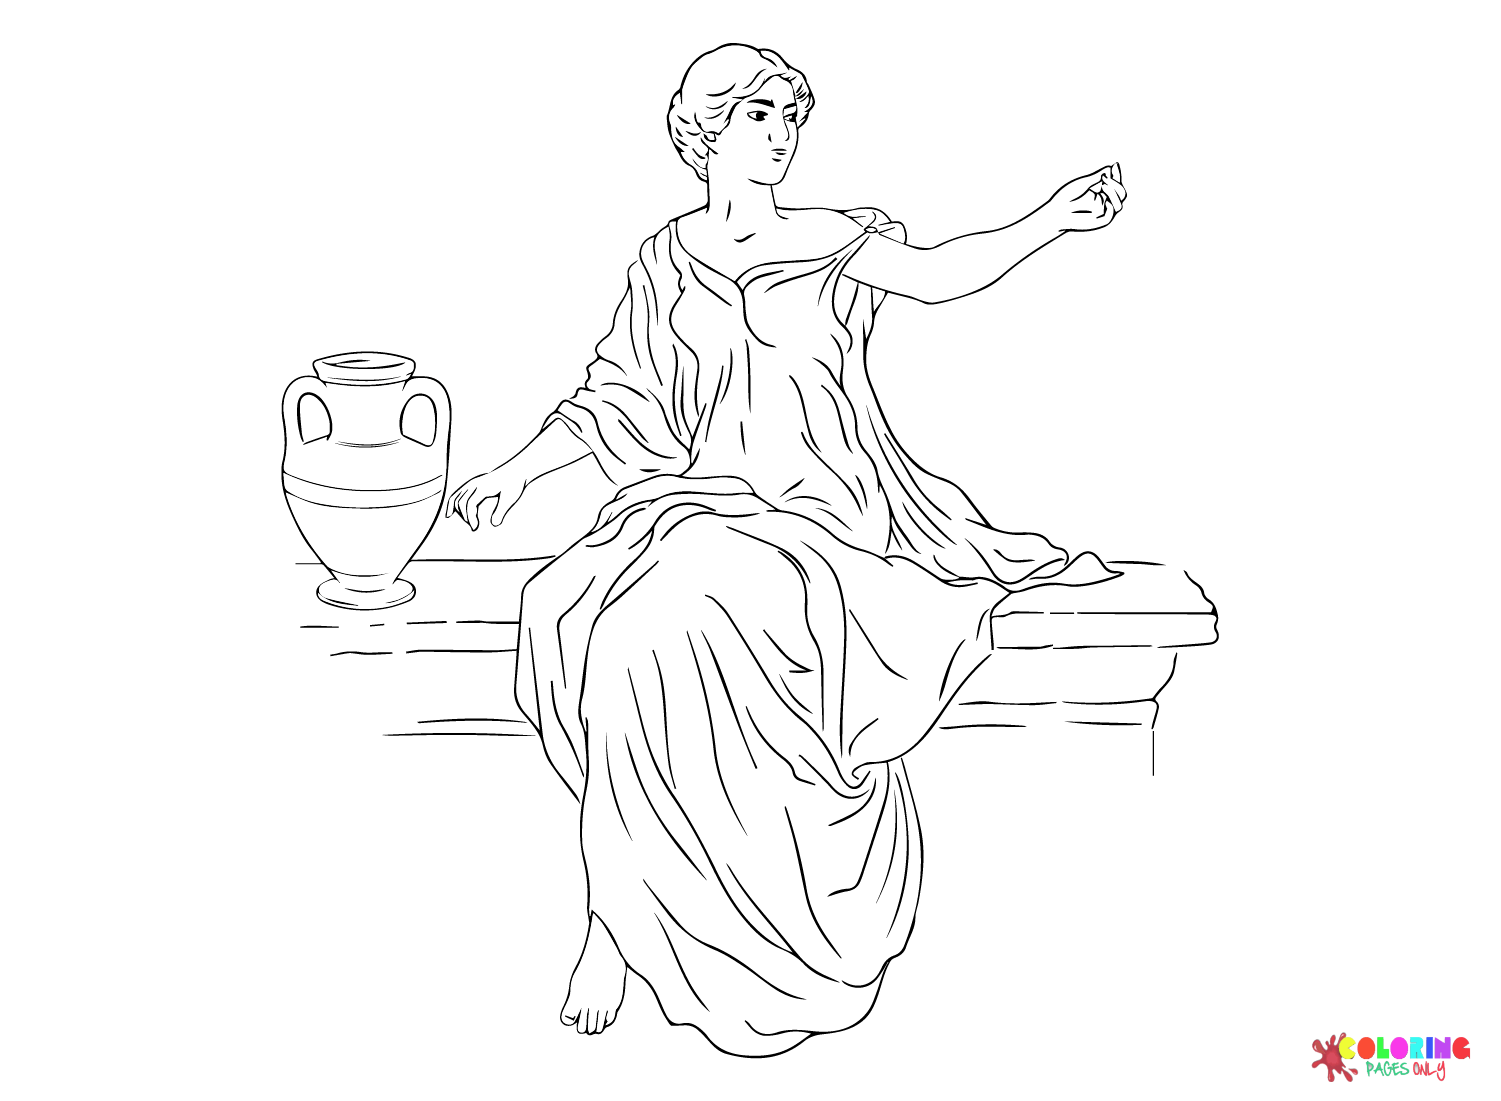 Vector Ancient Greek Woman Sits on a Chair Near a Jug of Wine from Ancient Rome and Roman Empire